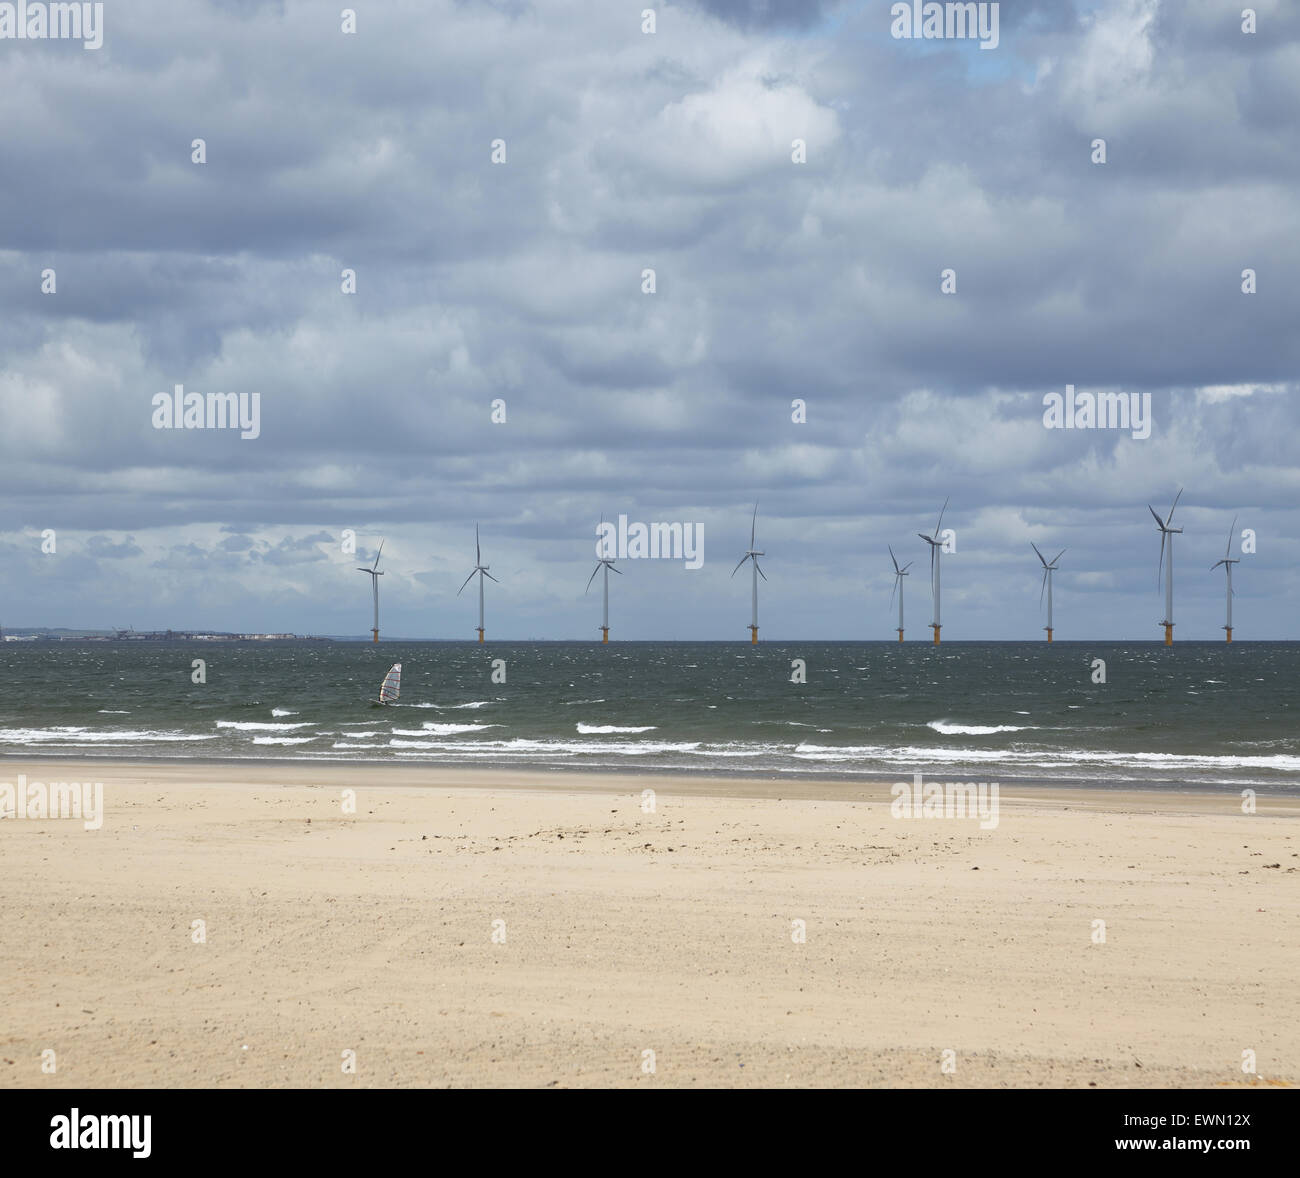 Offshore wind farm in the River Tees estuary photographed from Redcar beach. Windsurfer in the foreground Stock Photo